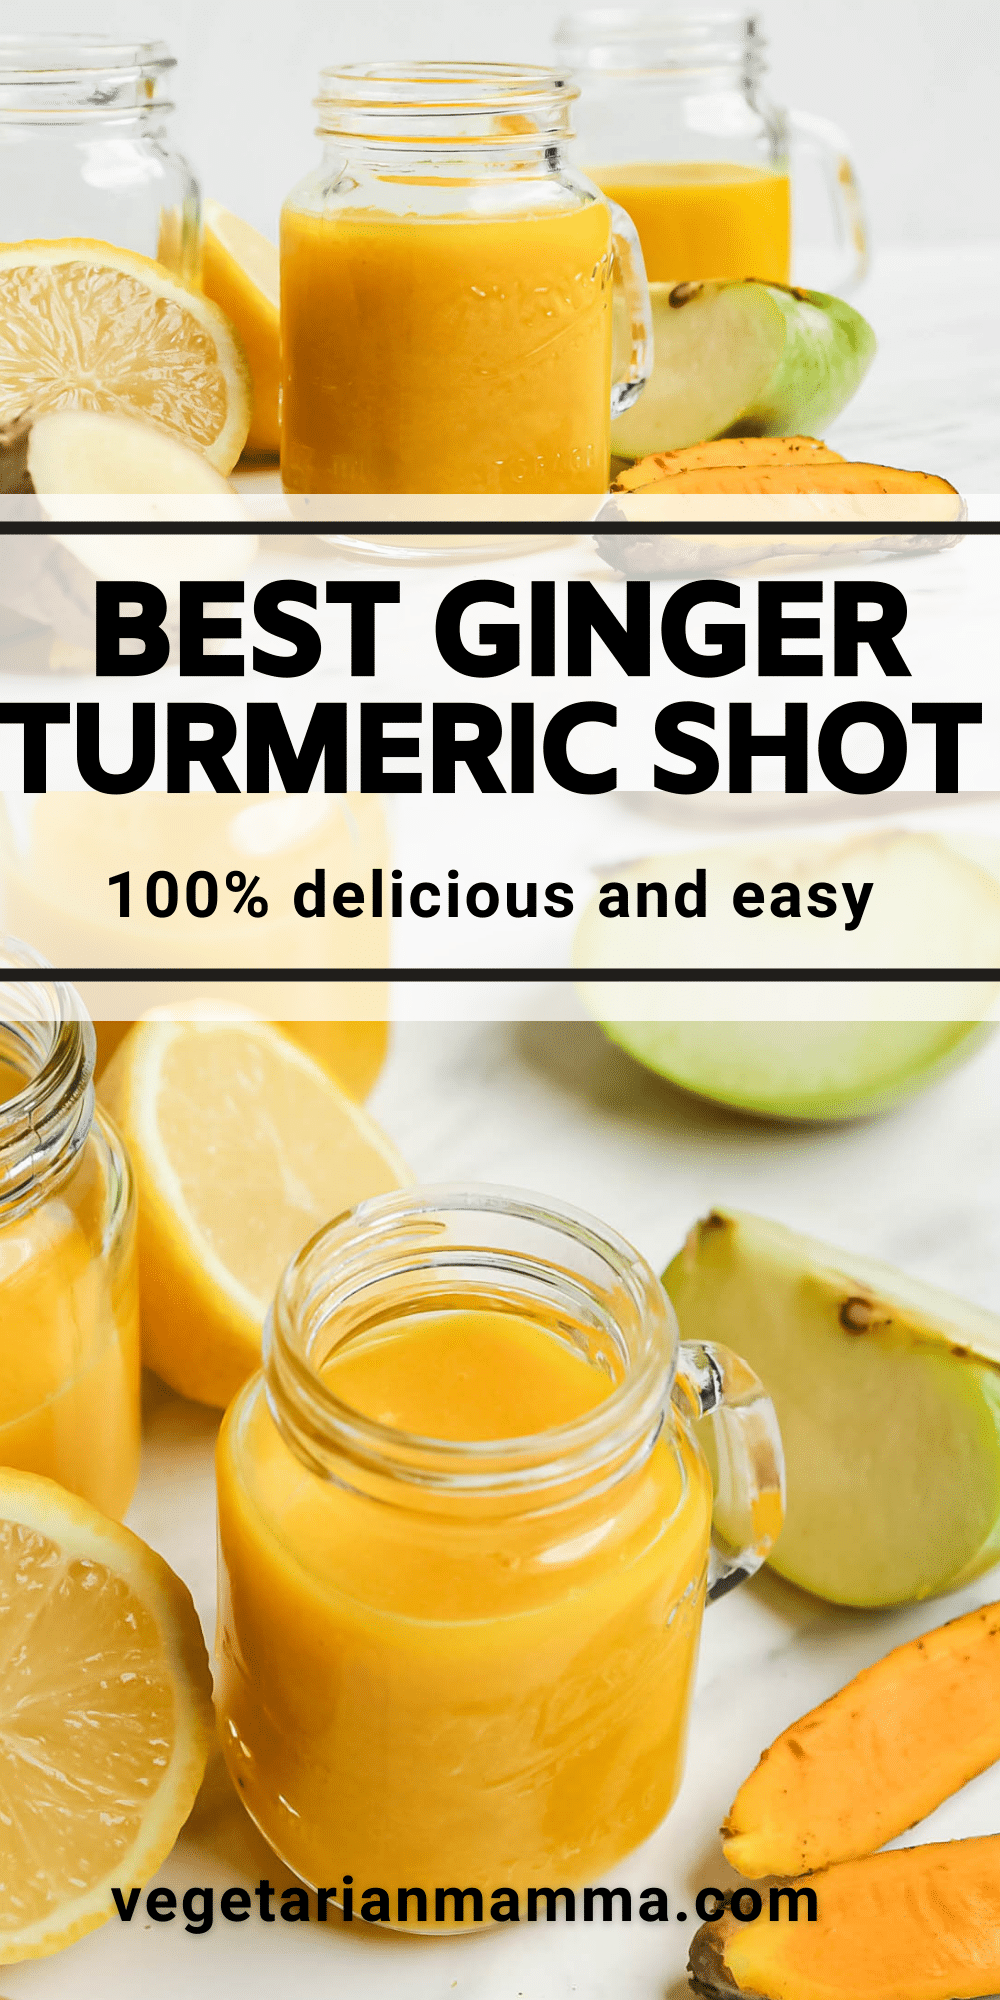 Use your blender to easily whip up a healthy and delicious ginger turmeric shot! These wellness shots are packed with nutrients, and so tasty with natural sweetness and a bit of spice.